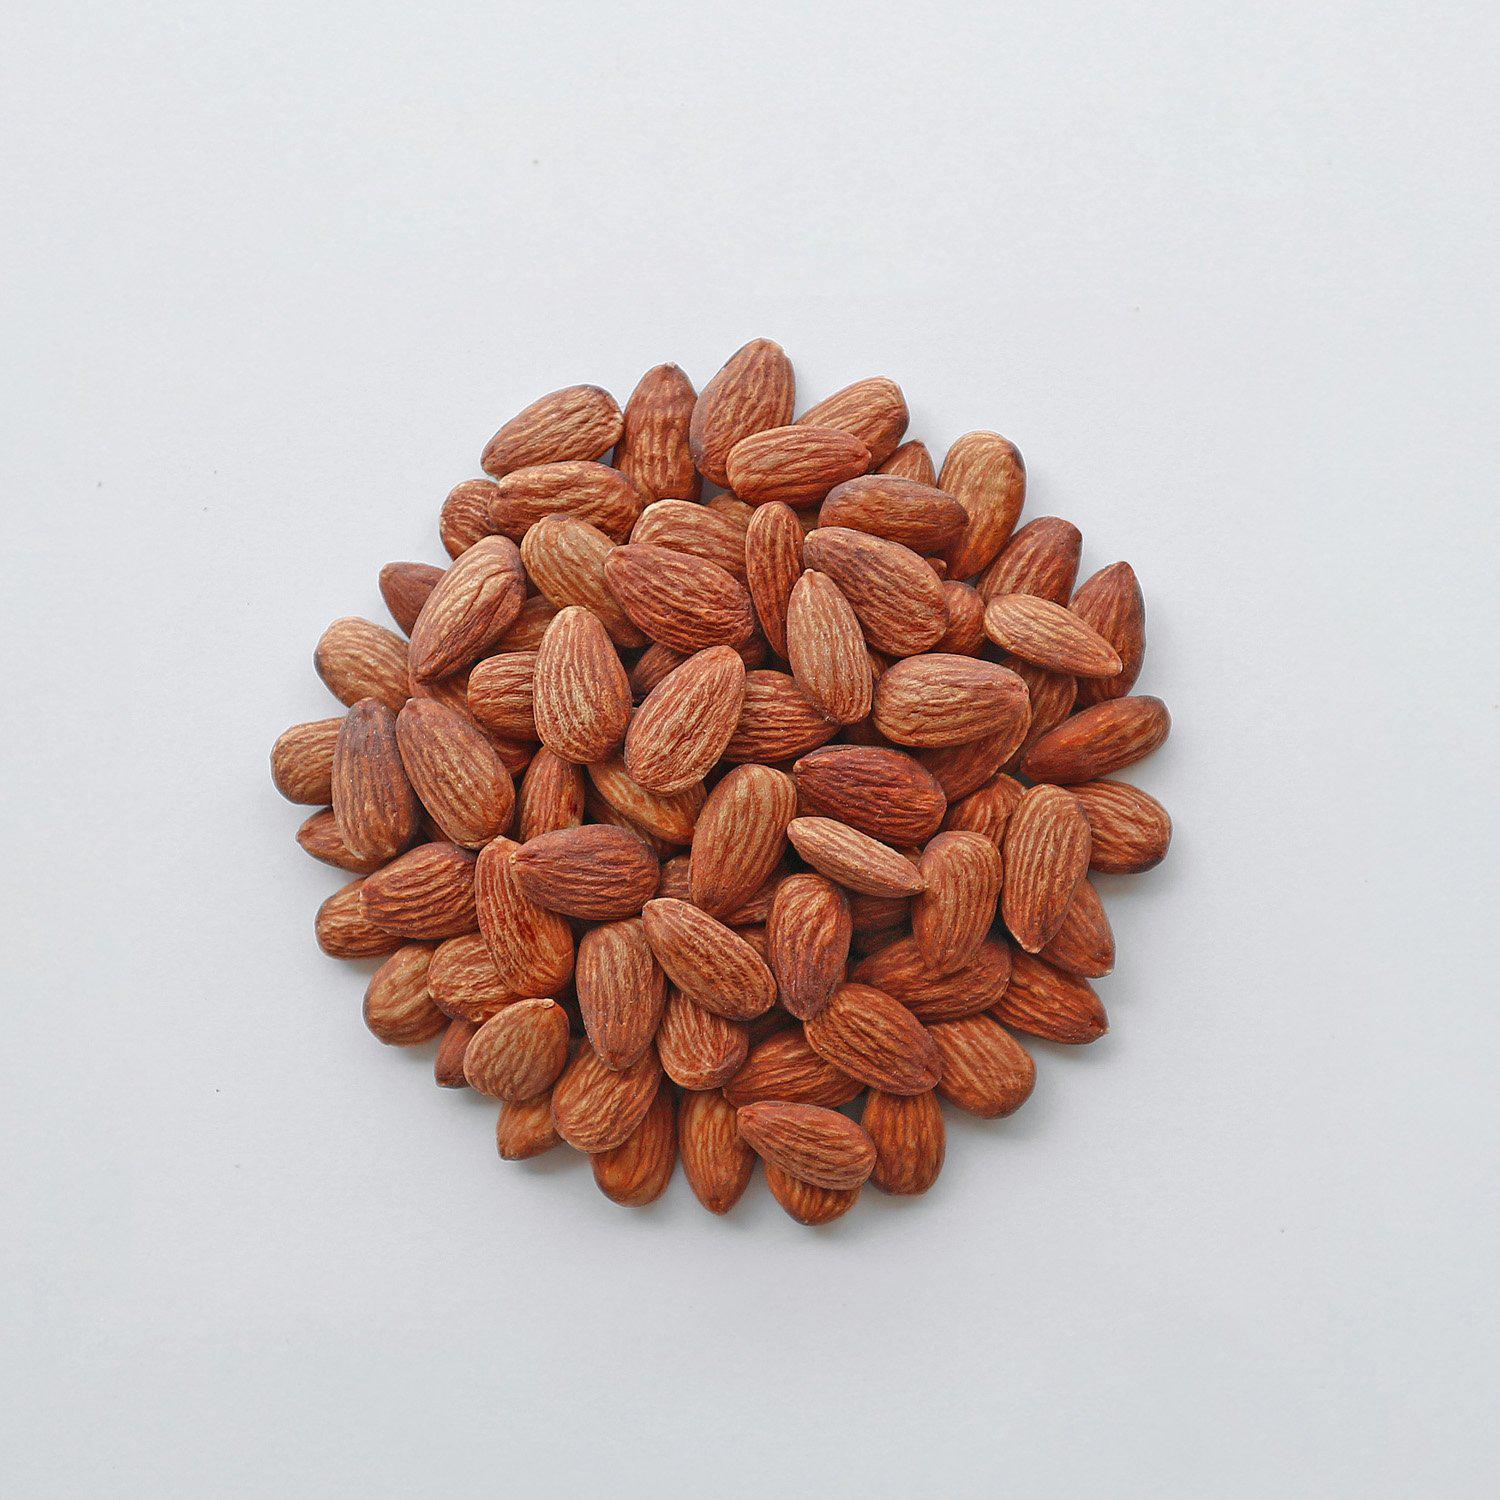 UNSALTED ALMONDS-Roasted Nuts-The Roasted Nut Inc.